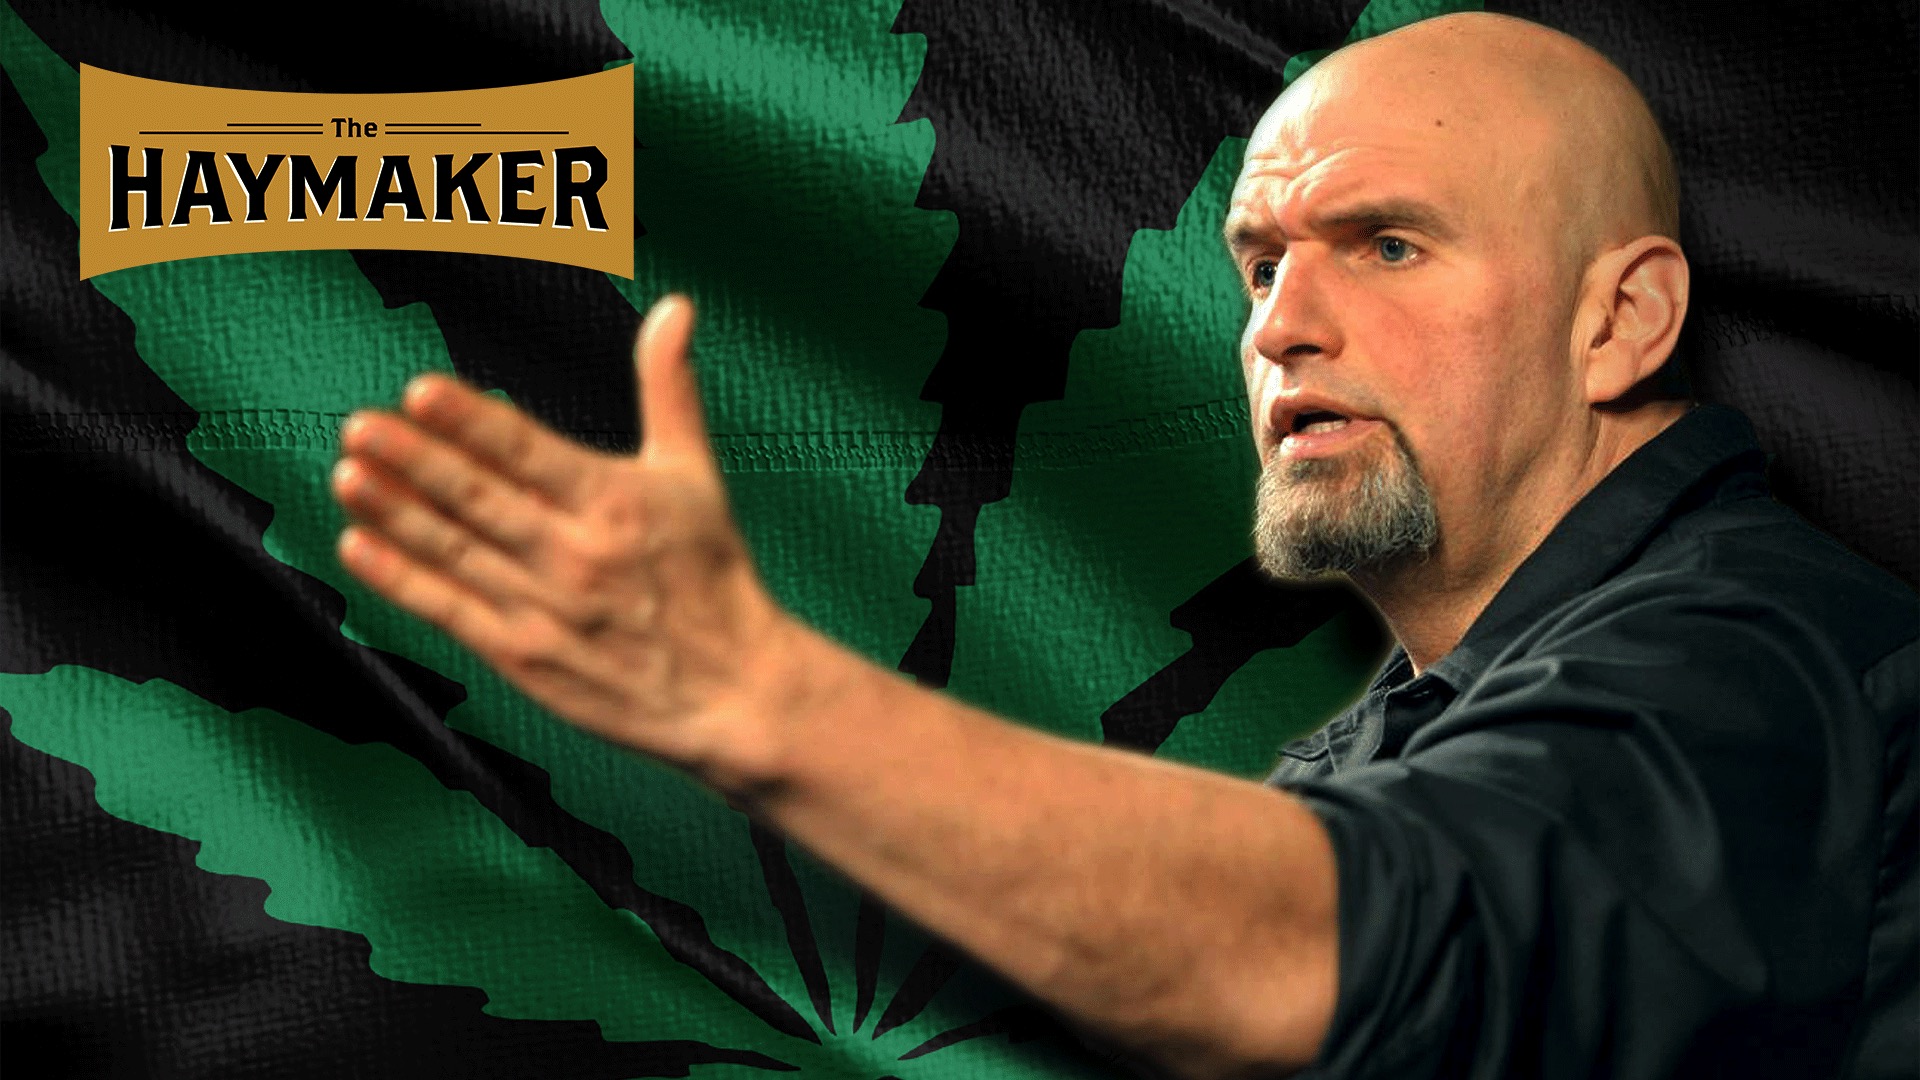 Fetterman’s primary landslide puts others on notice: Weed wins